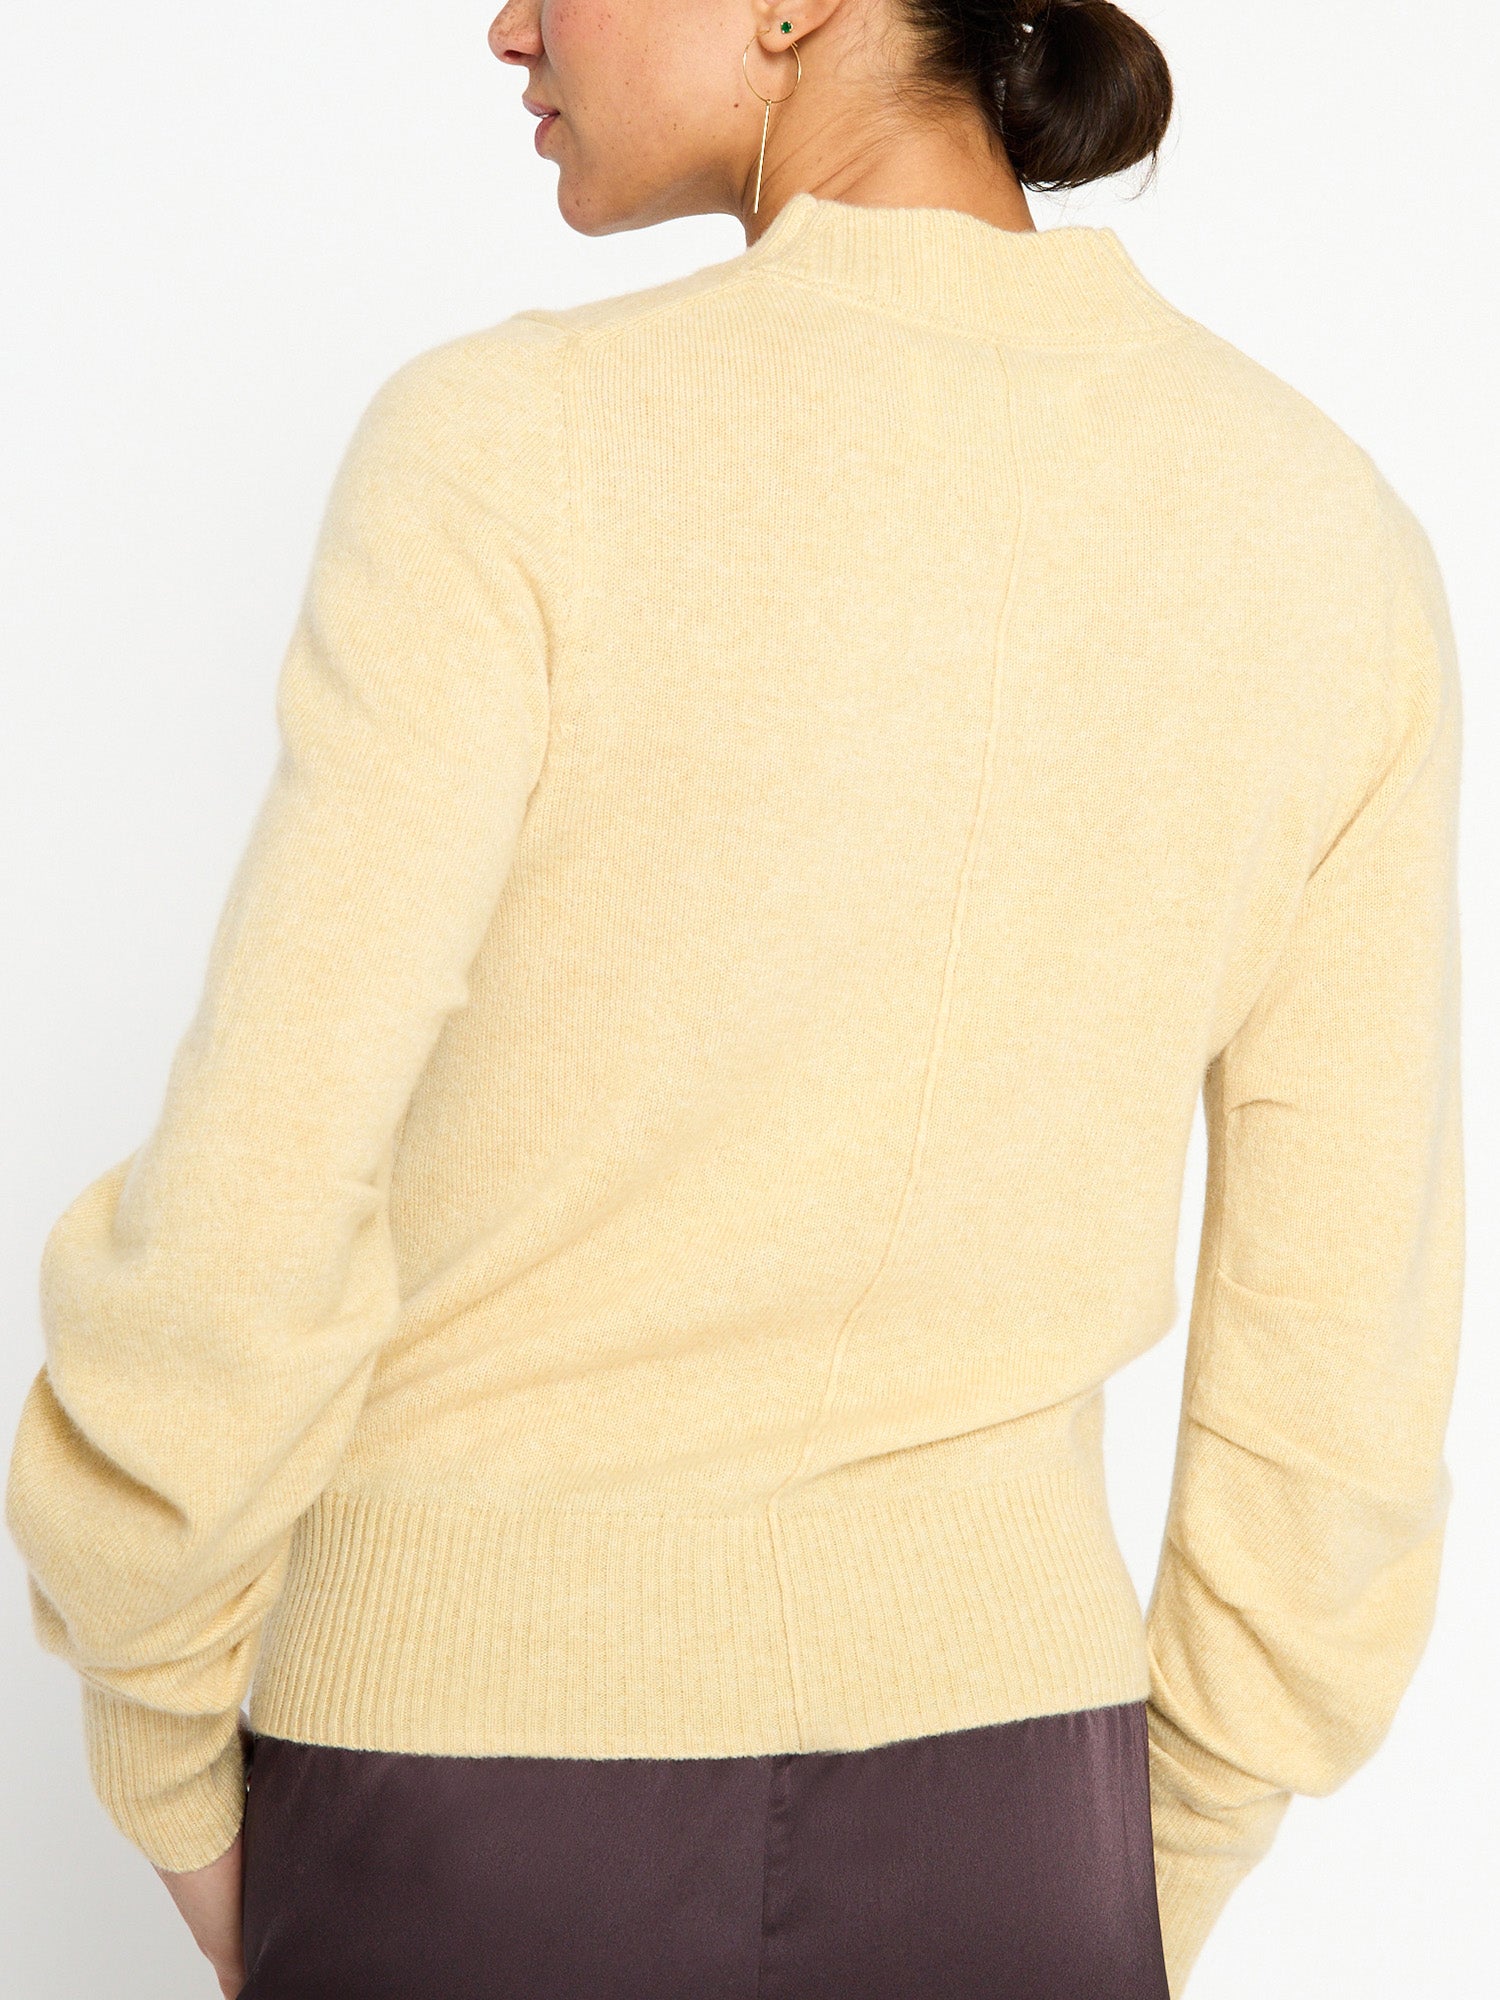 Norde cashmere crewneck yellow sweater back view